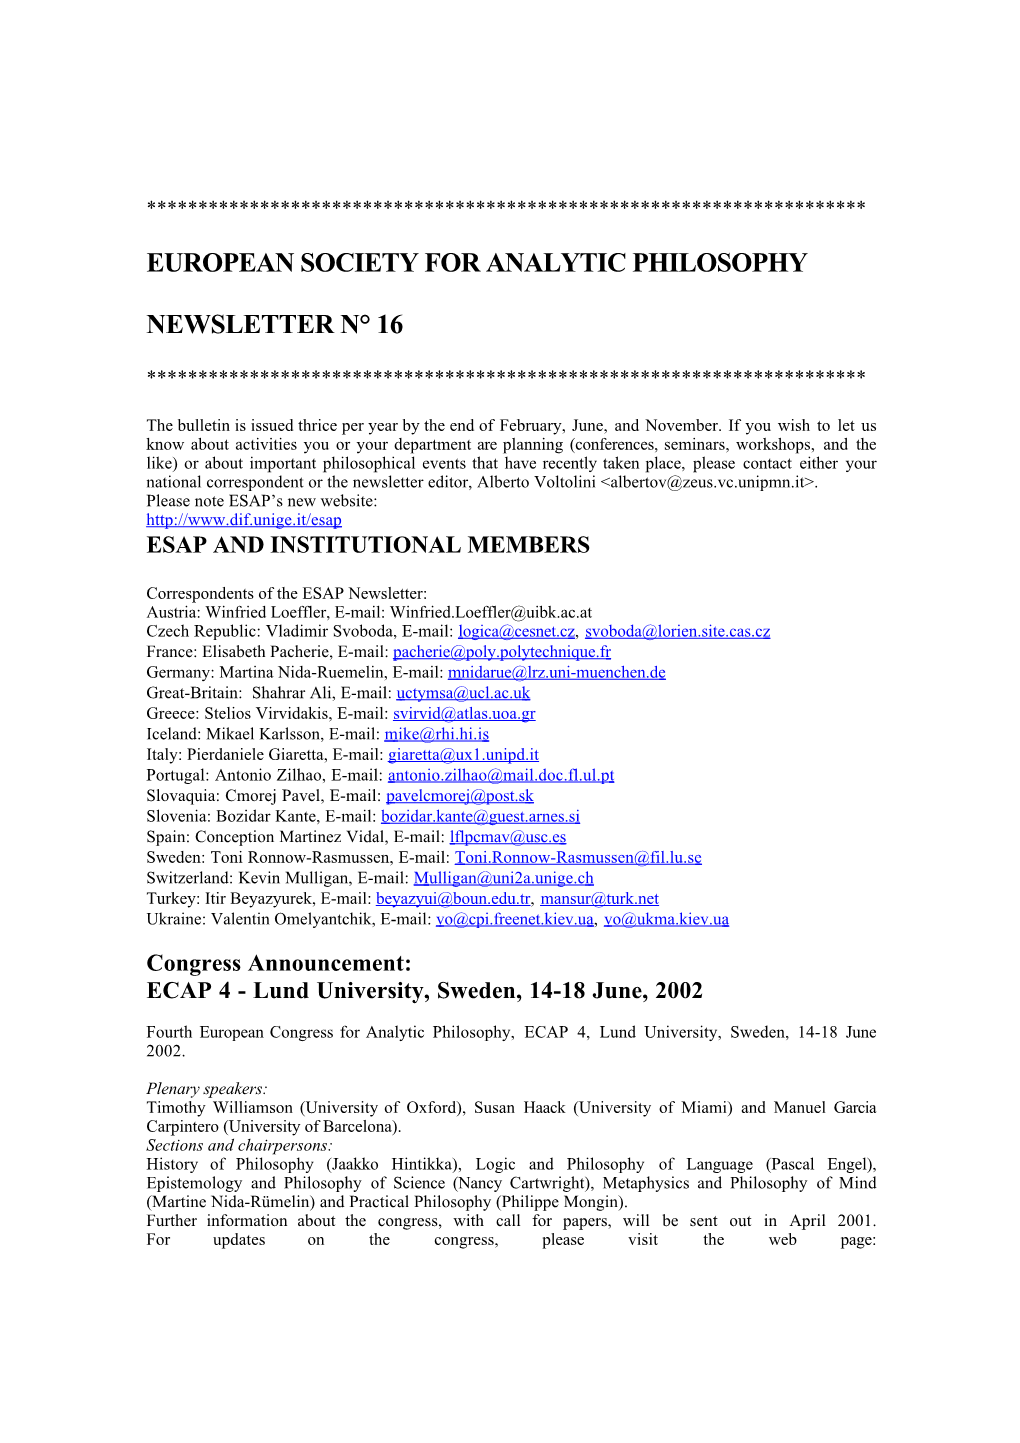 European Society for Analytic Philosophy